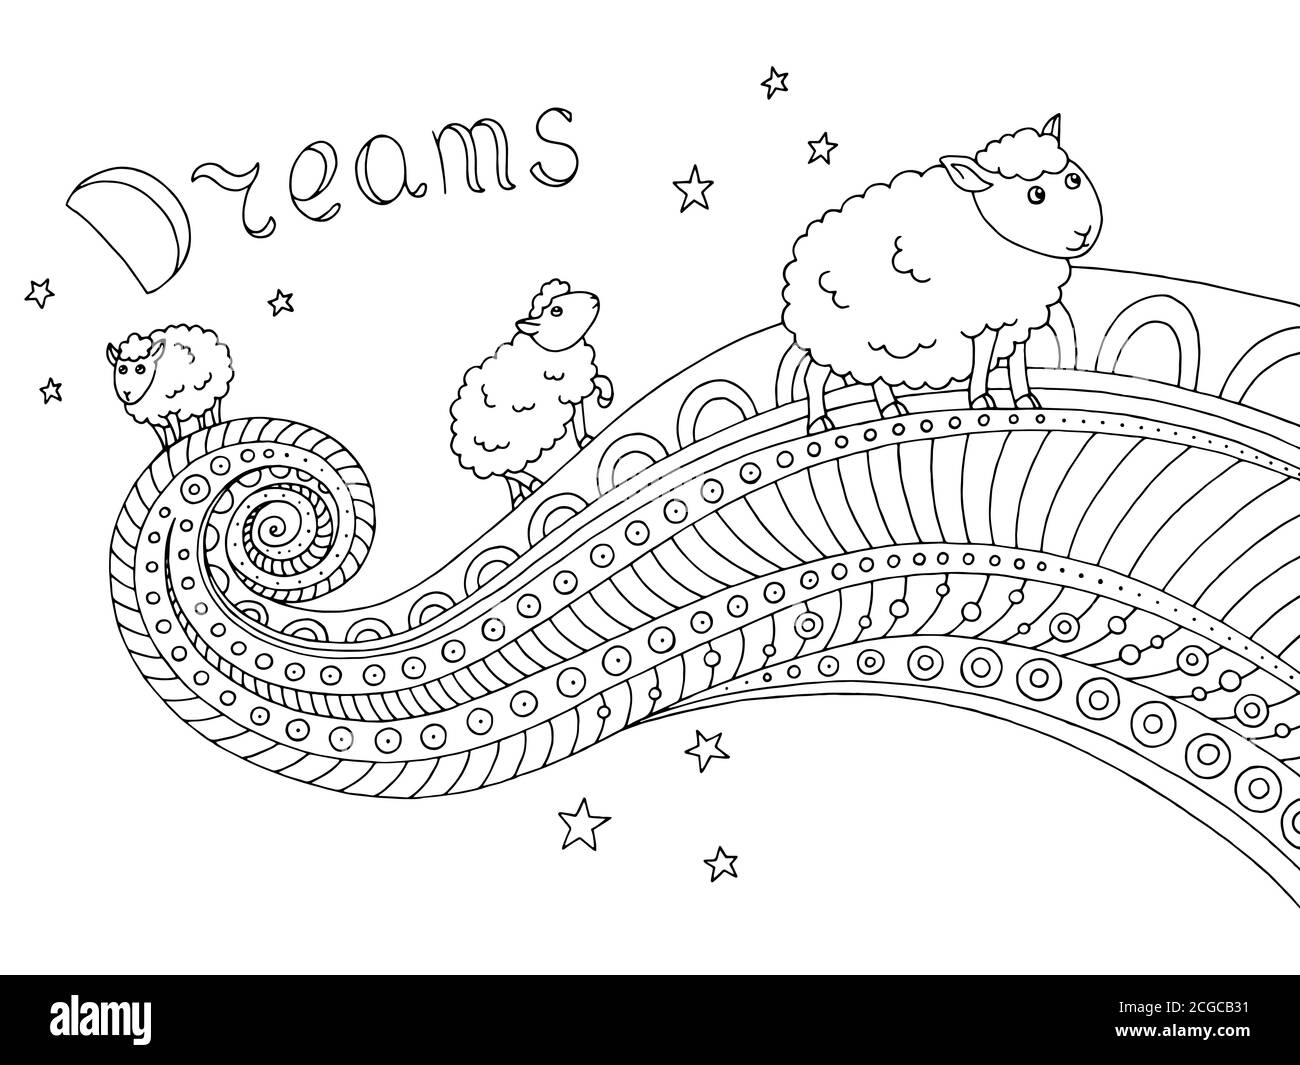 Dreams sheep black white graphic abstract doodle pattern sketch illustration vector Stock Vector